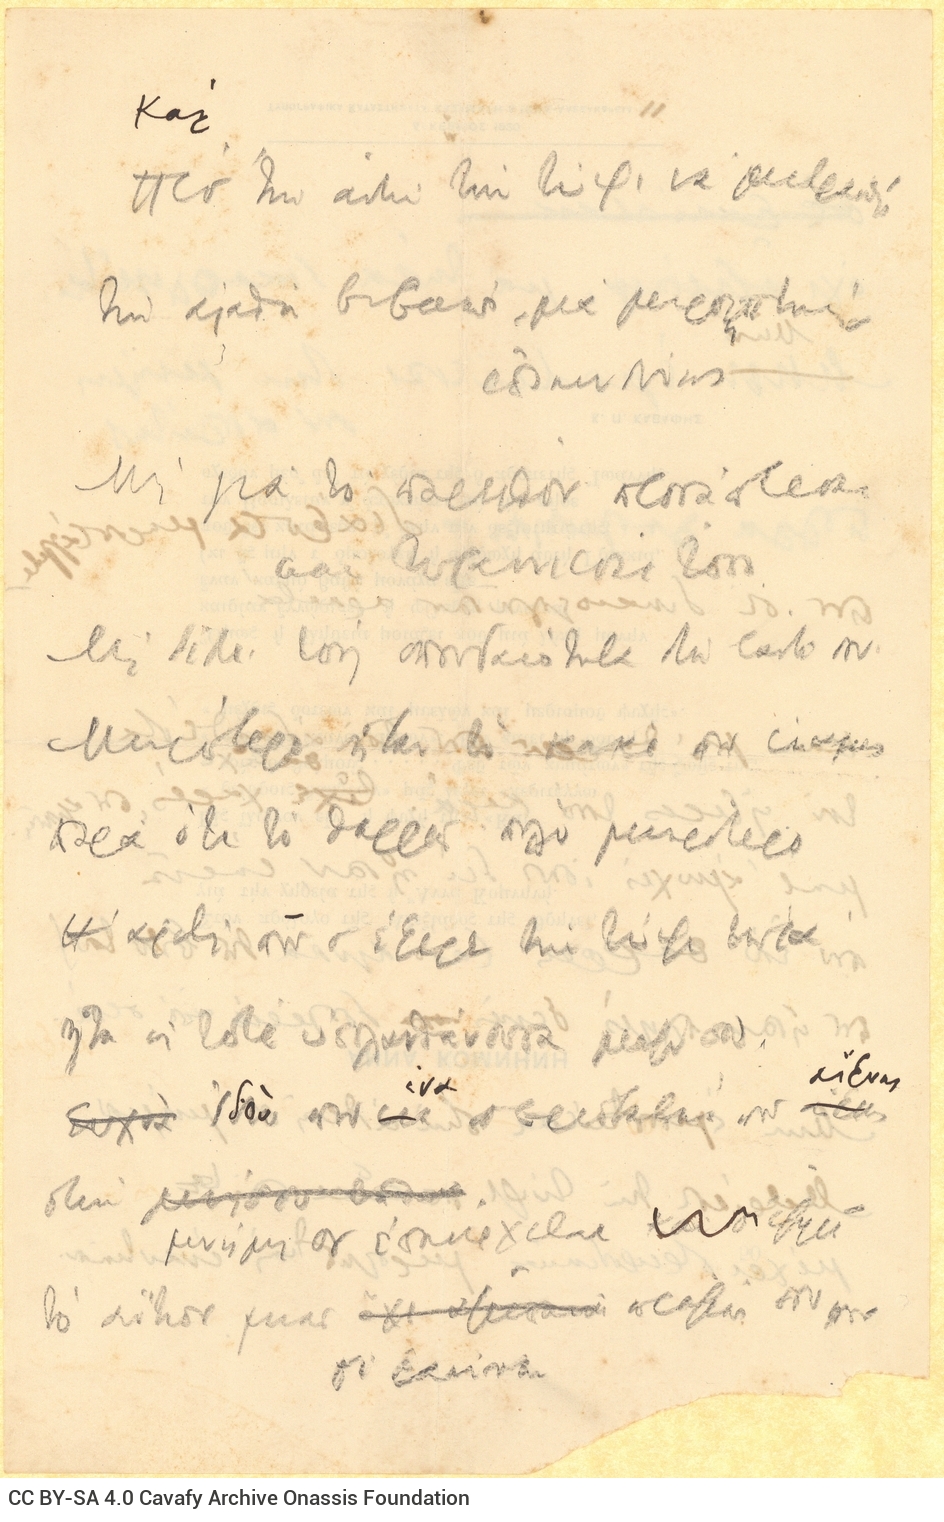 Handwritten draft of the poem "Remorse", written in pencil and ink on both sides of a broadsheet of the poem "Anna Comnena